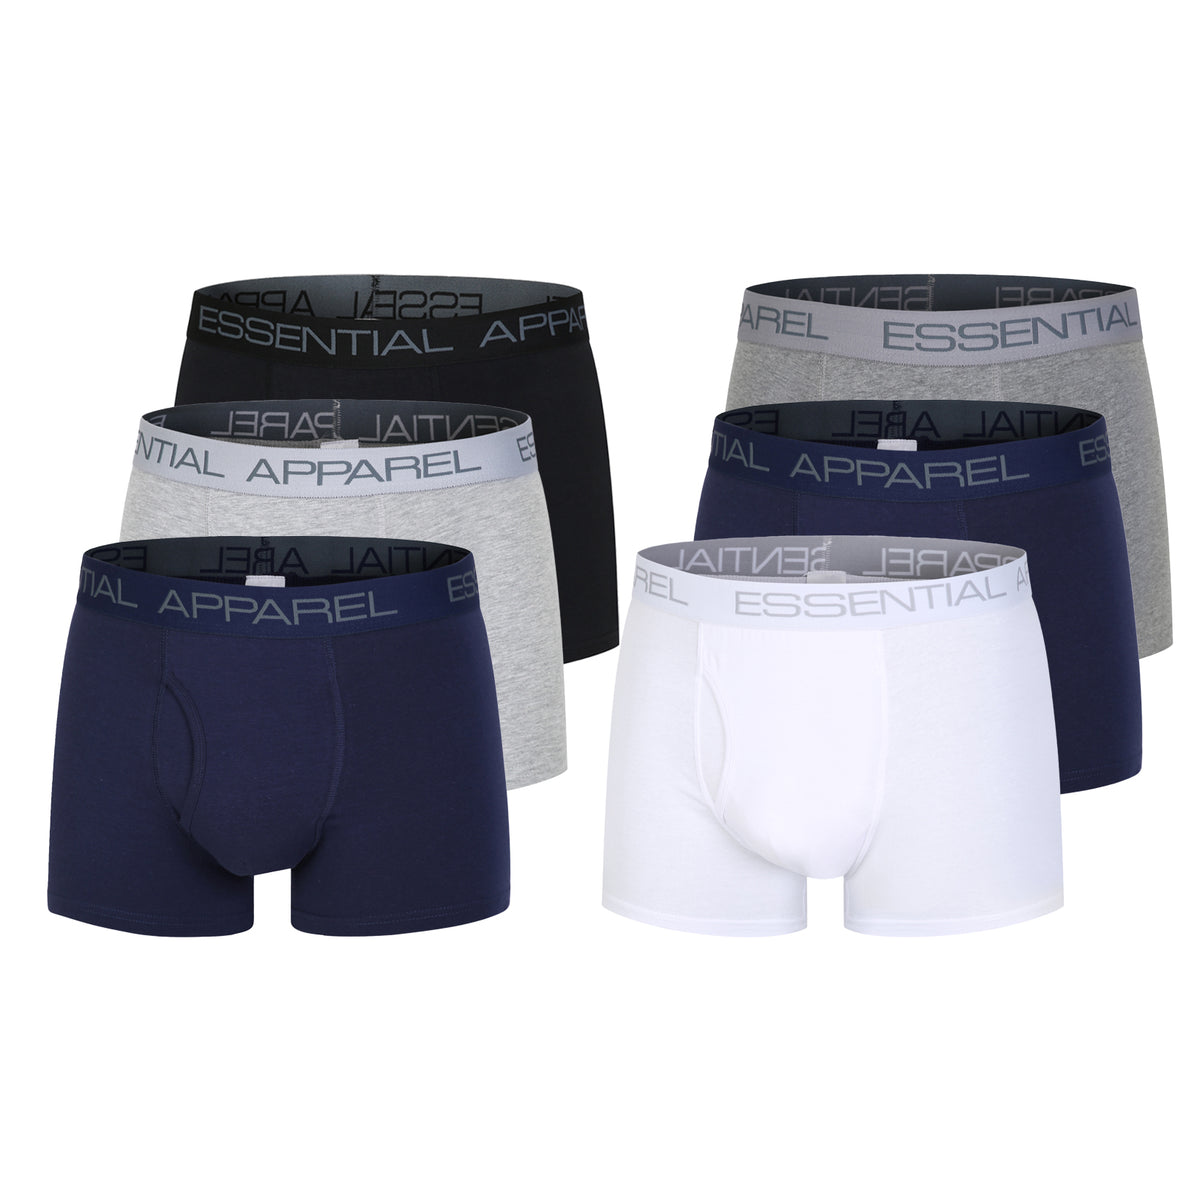 Assorted Boxers 6 Pack